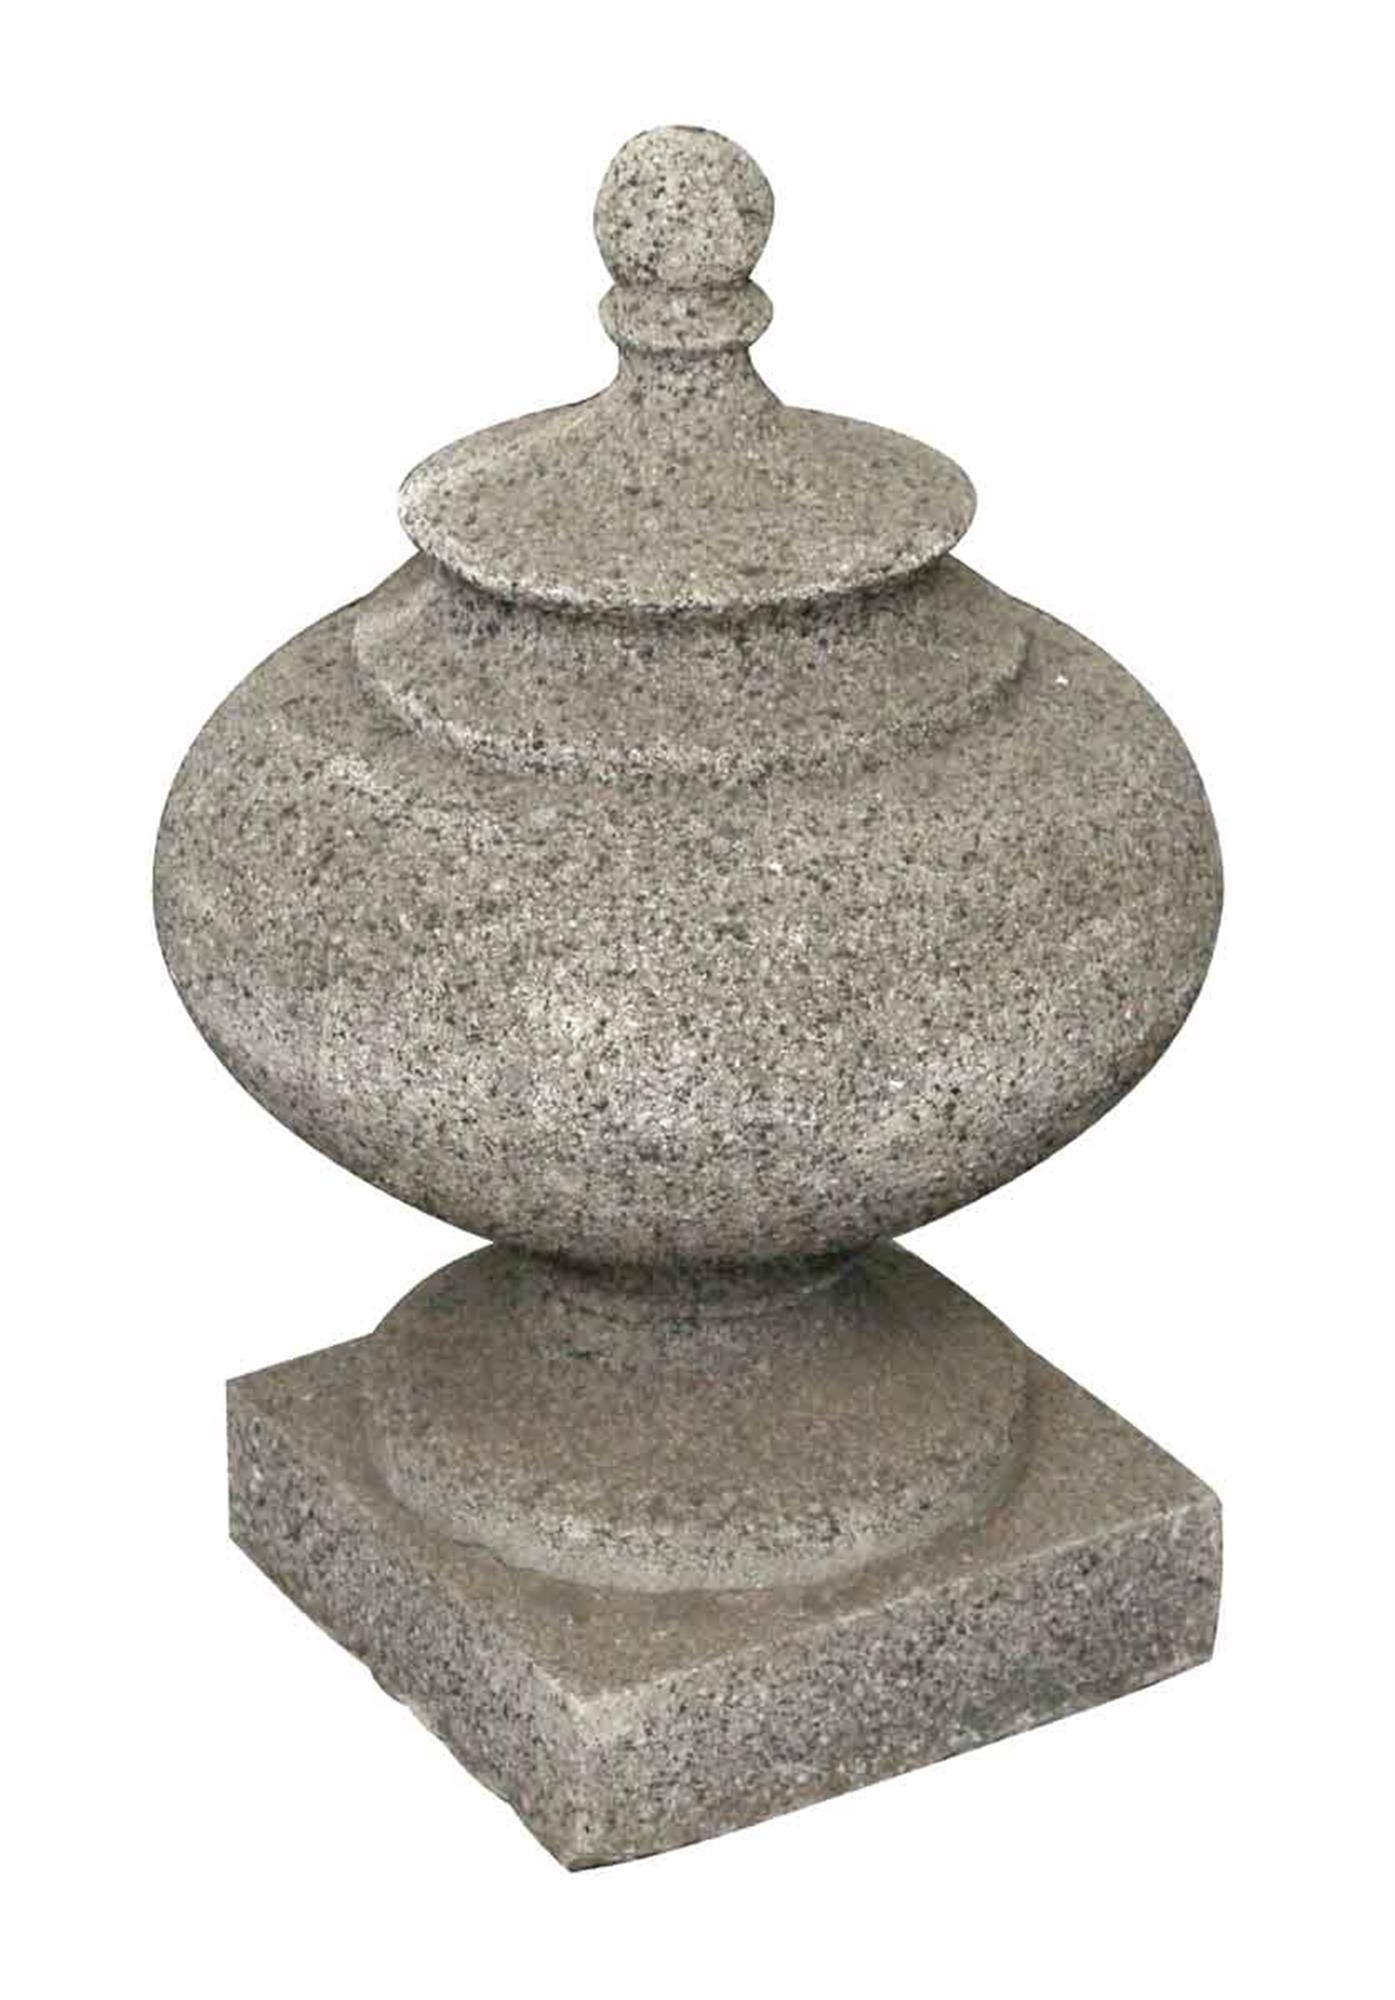 1930s light gray large stone finial with a simple design. From either a porch or garden. This can be seen at our 400 Gilligan St location in Scranton, PA.